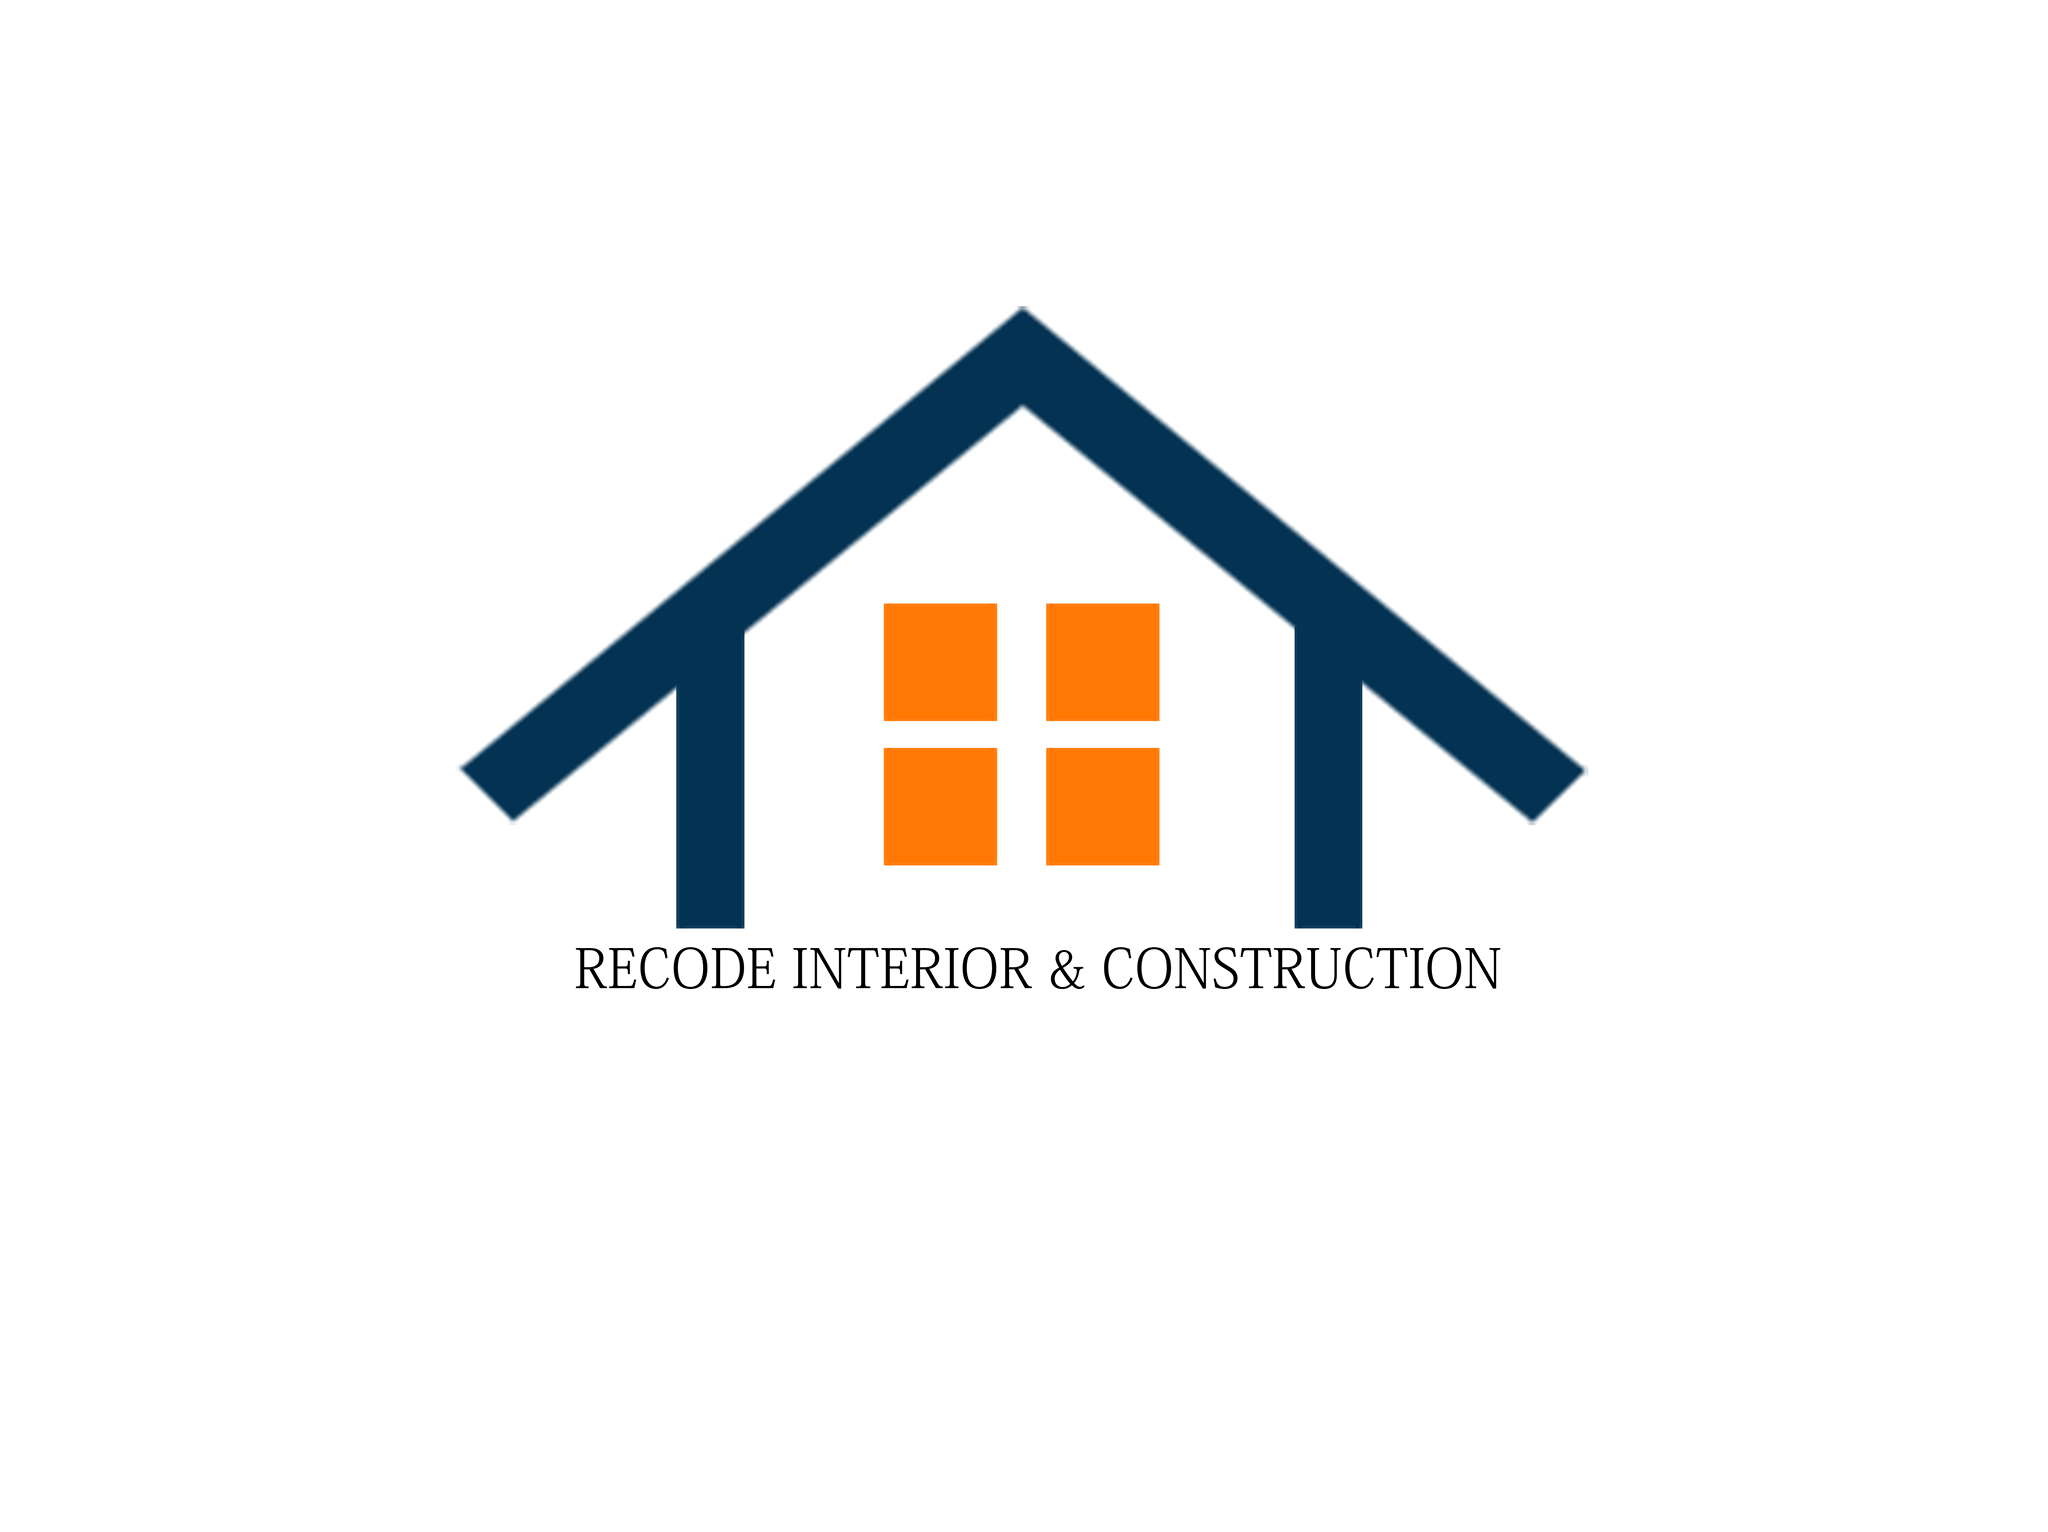 RECODE INTERIOR & CONSTRUCTION|Accounting Services|Professional Services